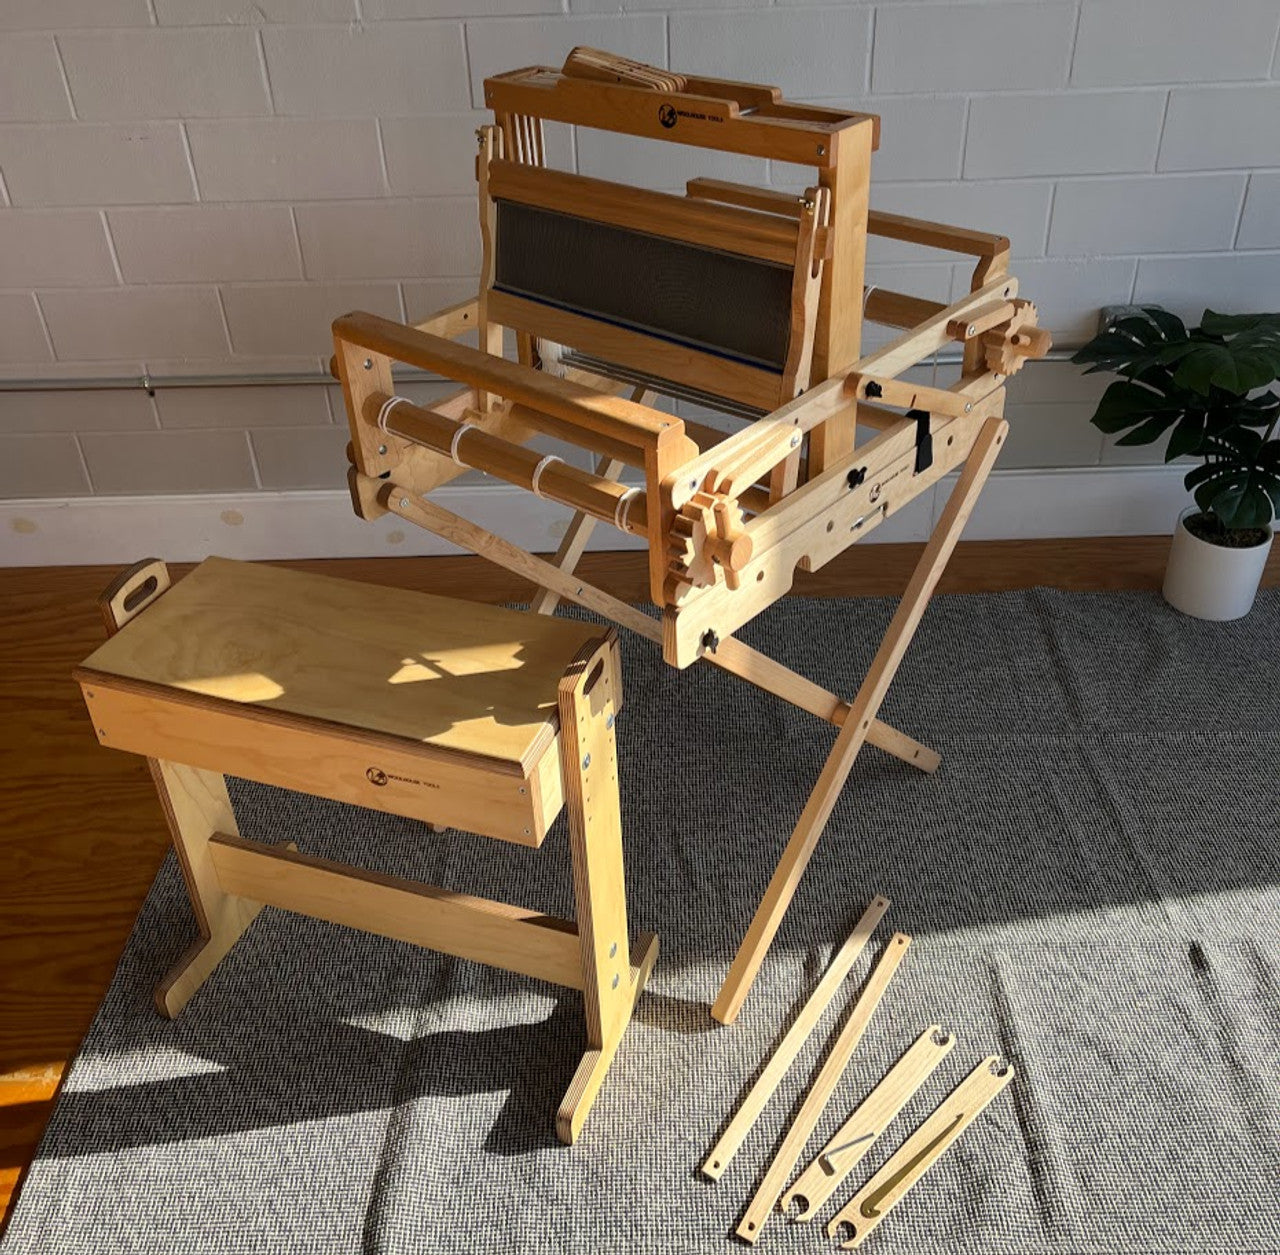 Norah 23.5" 8 Shaft Loom Package with Stand and Bench from Woolhouse Looms